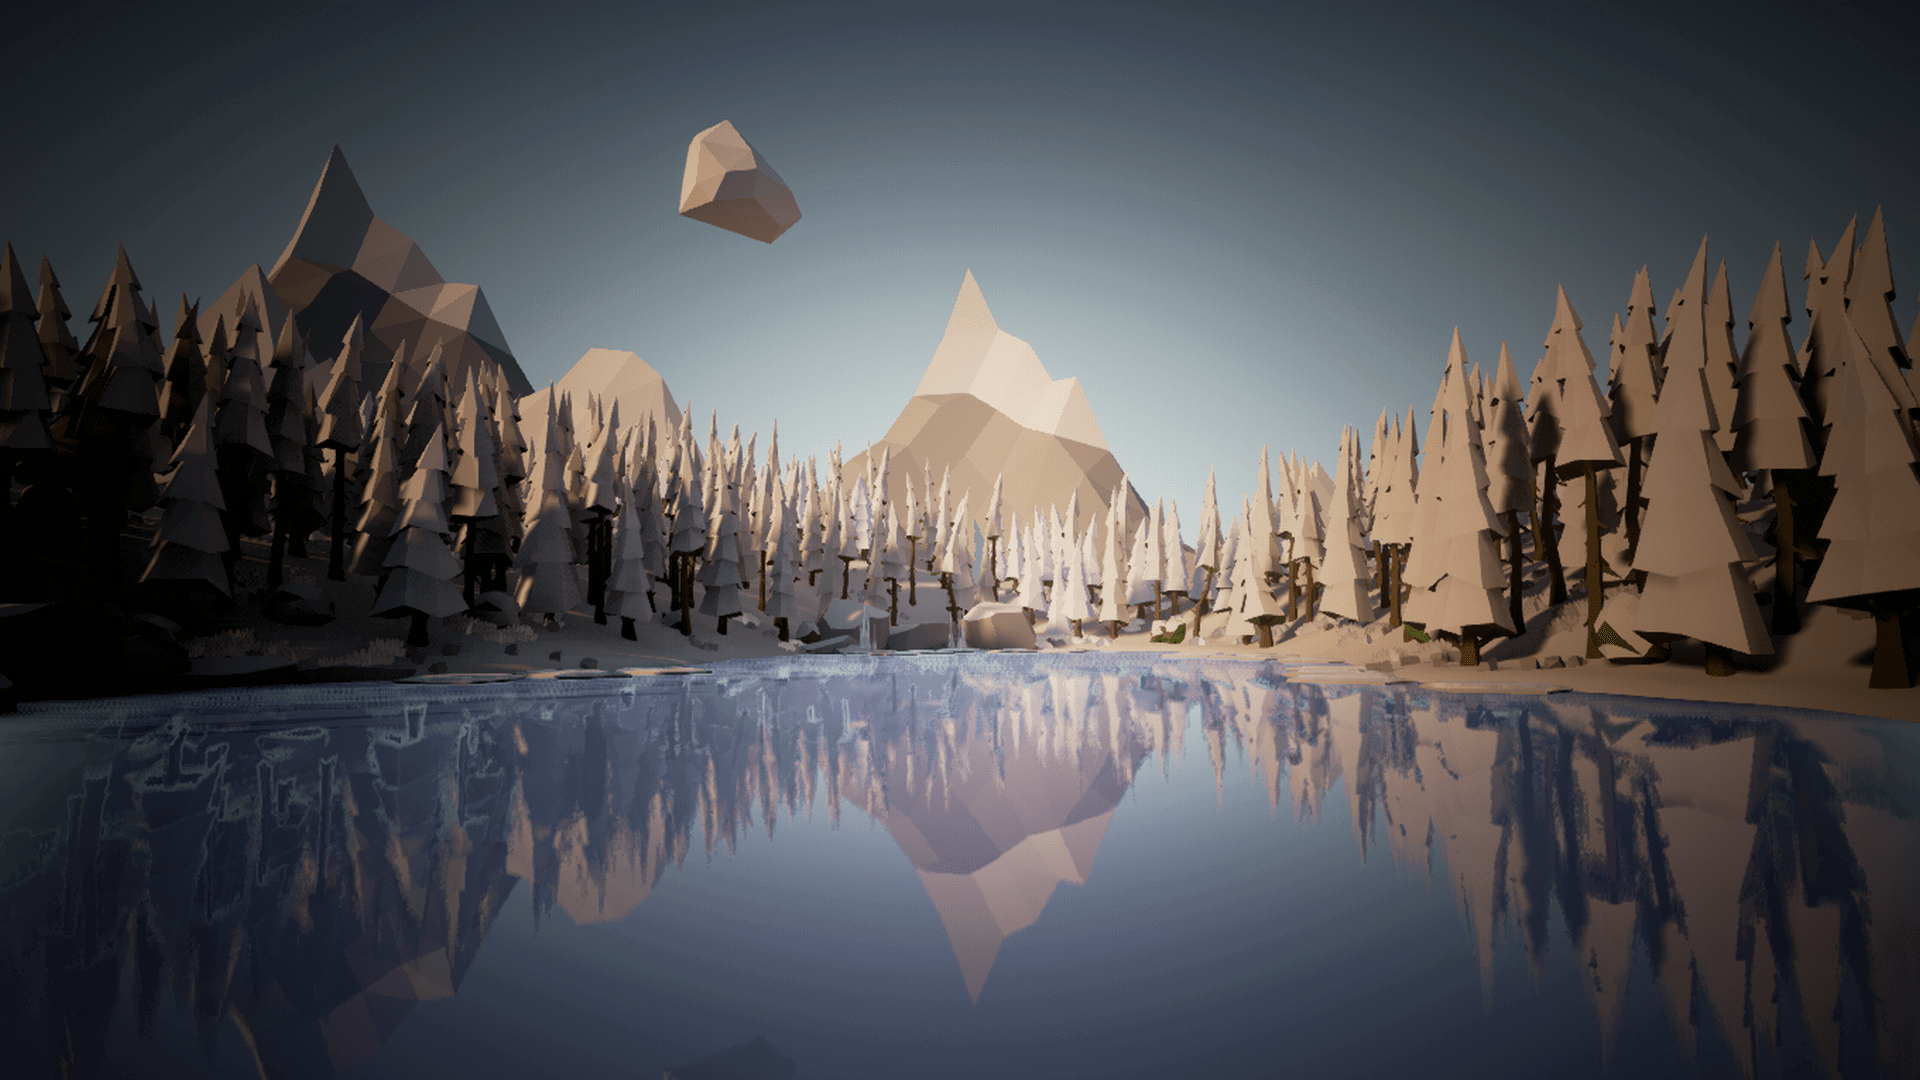 Olbert's Low Poly: Taiga by Whitman And Olbert in Environments